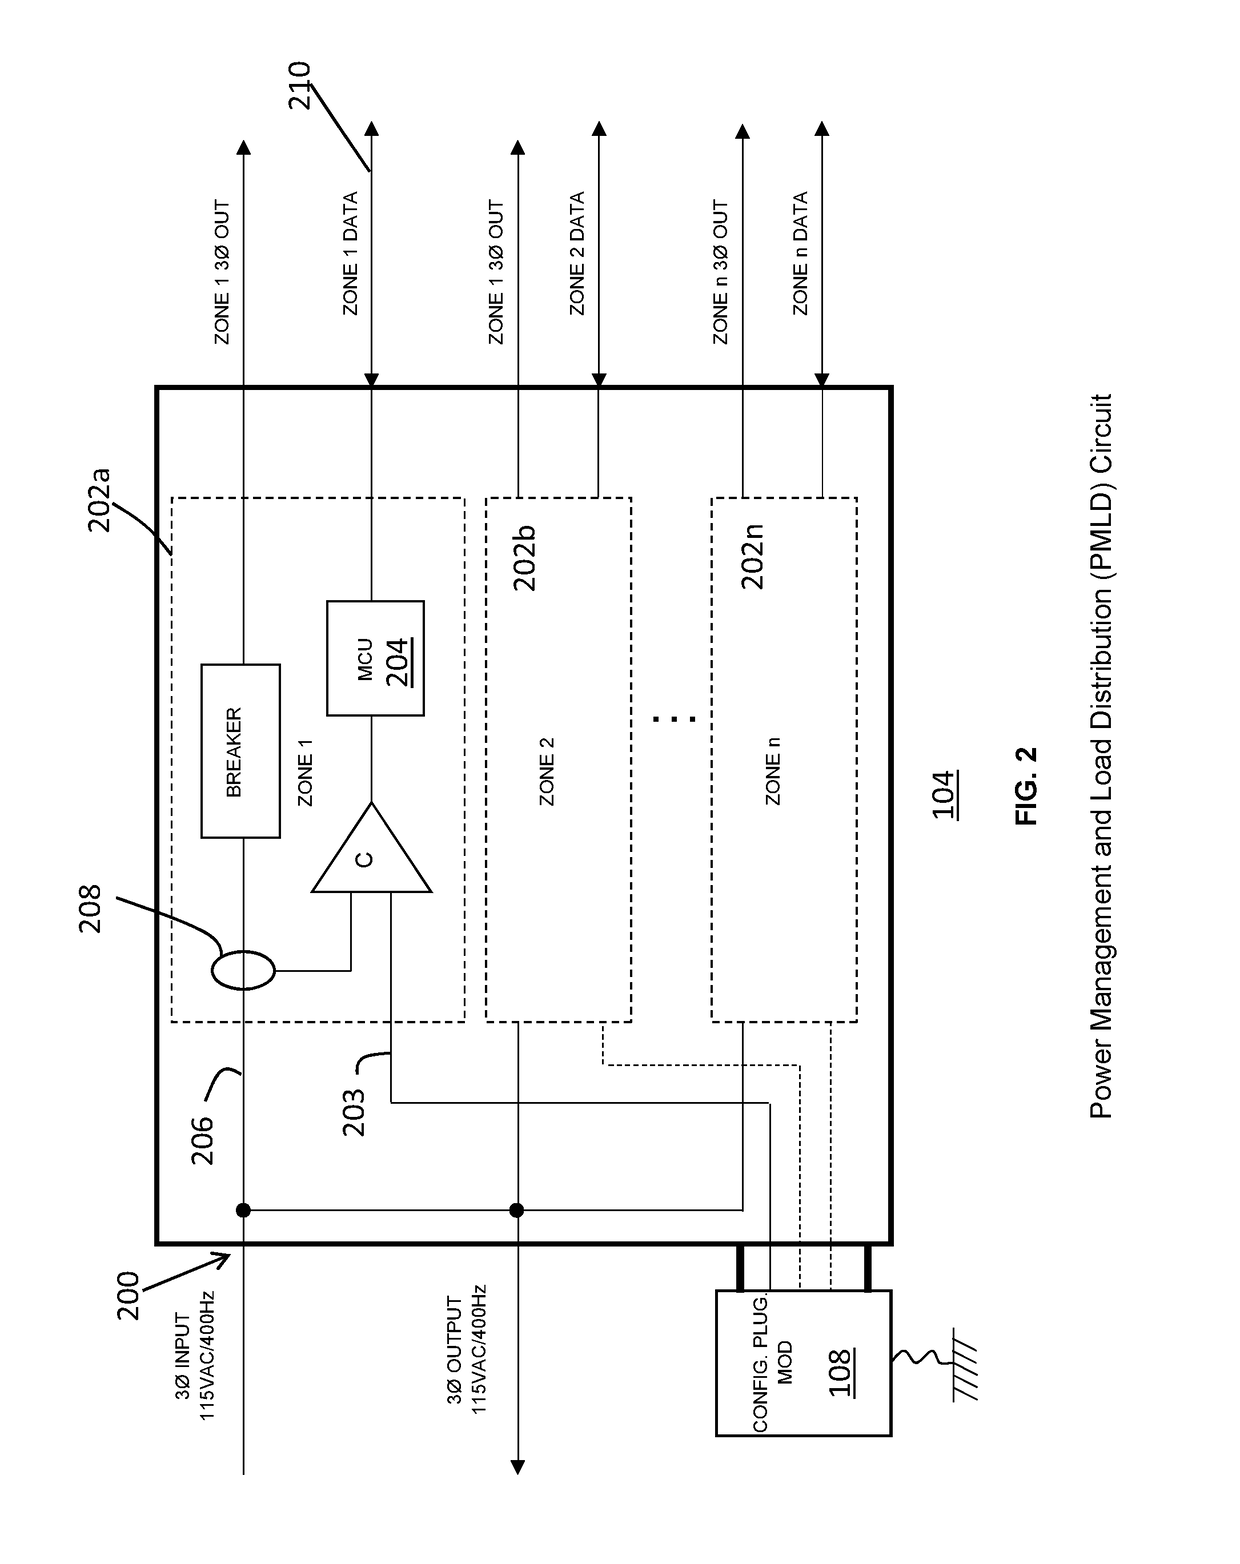 USB power management and load distribution system